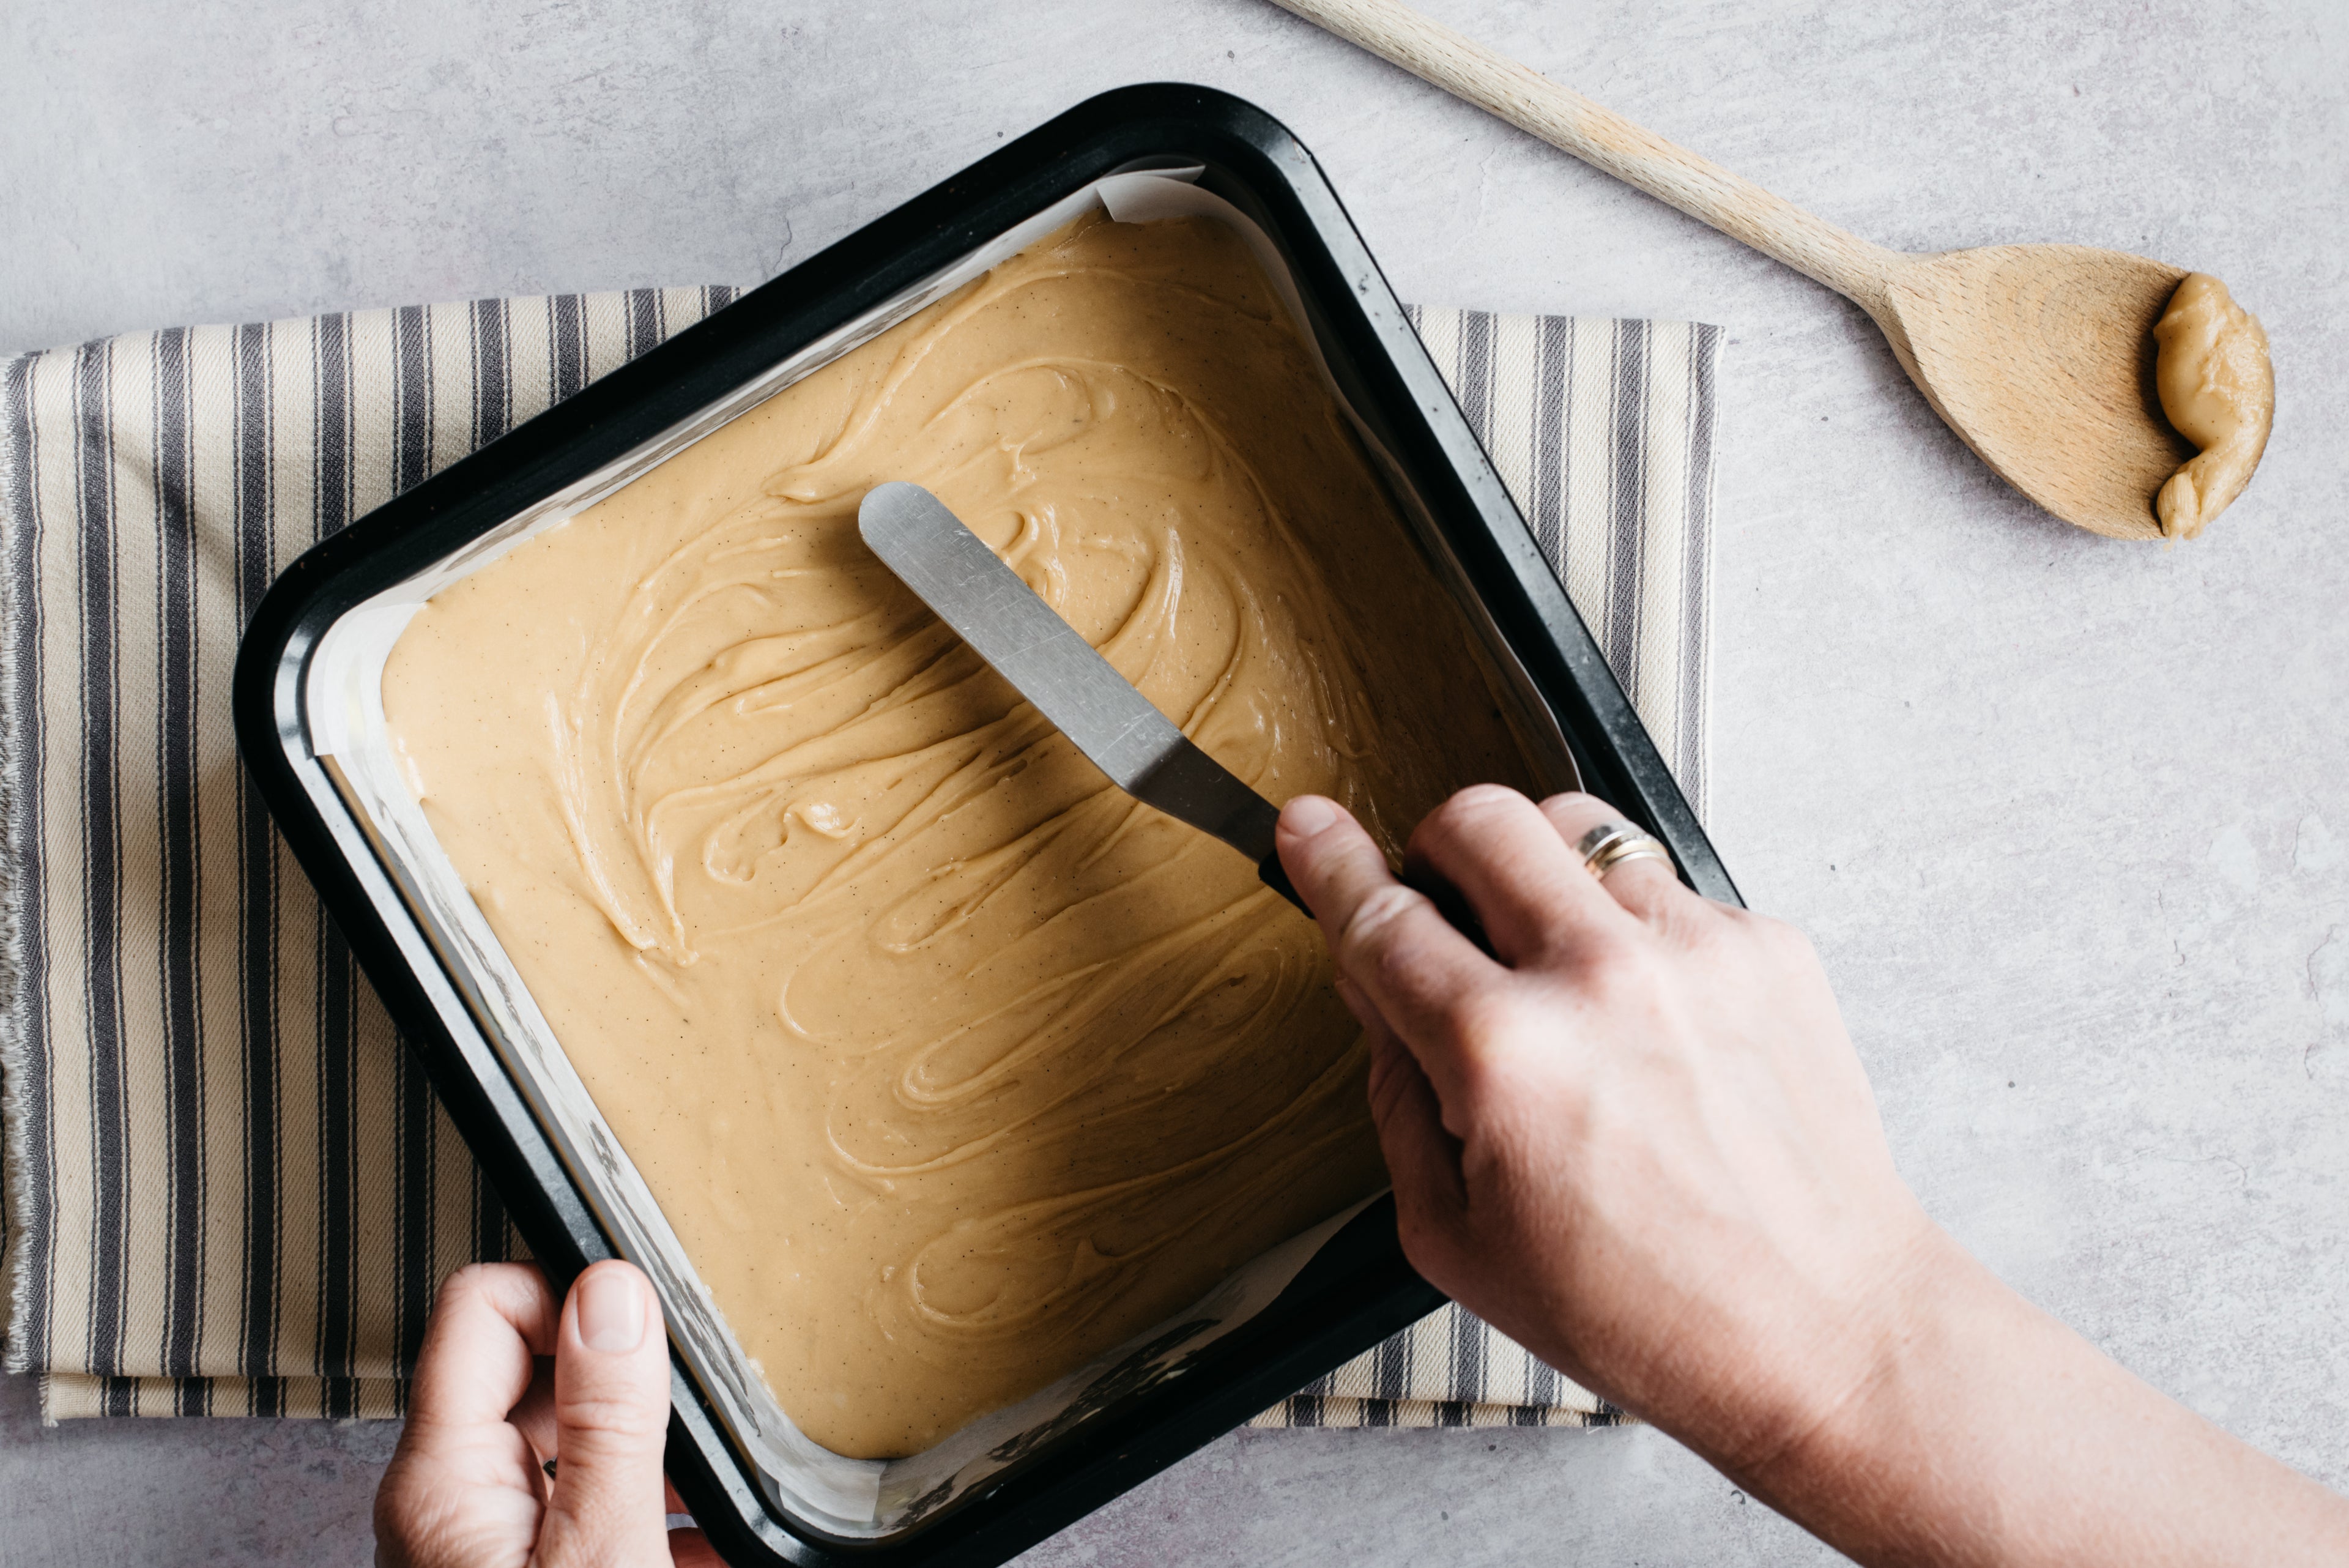 Hand smoothing down the fudge with a palette knife in a square baking tin. Stripe towel underneath and a wooden spoon with mixture on at the side